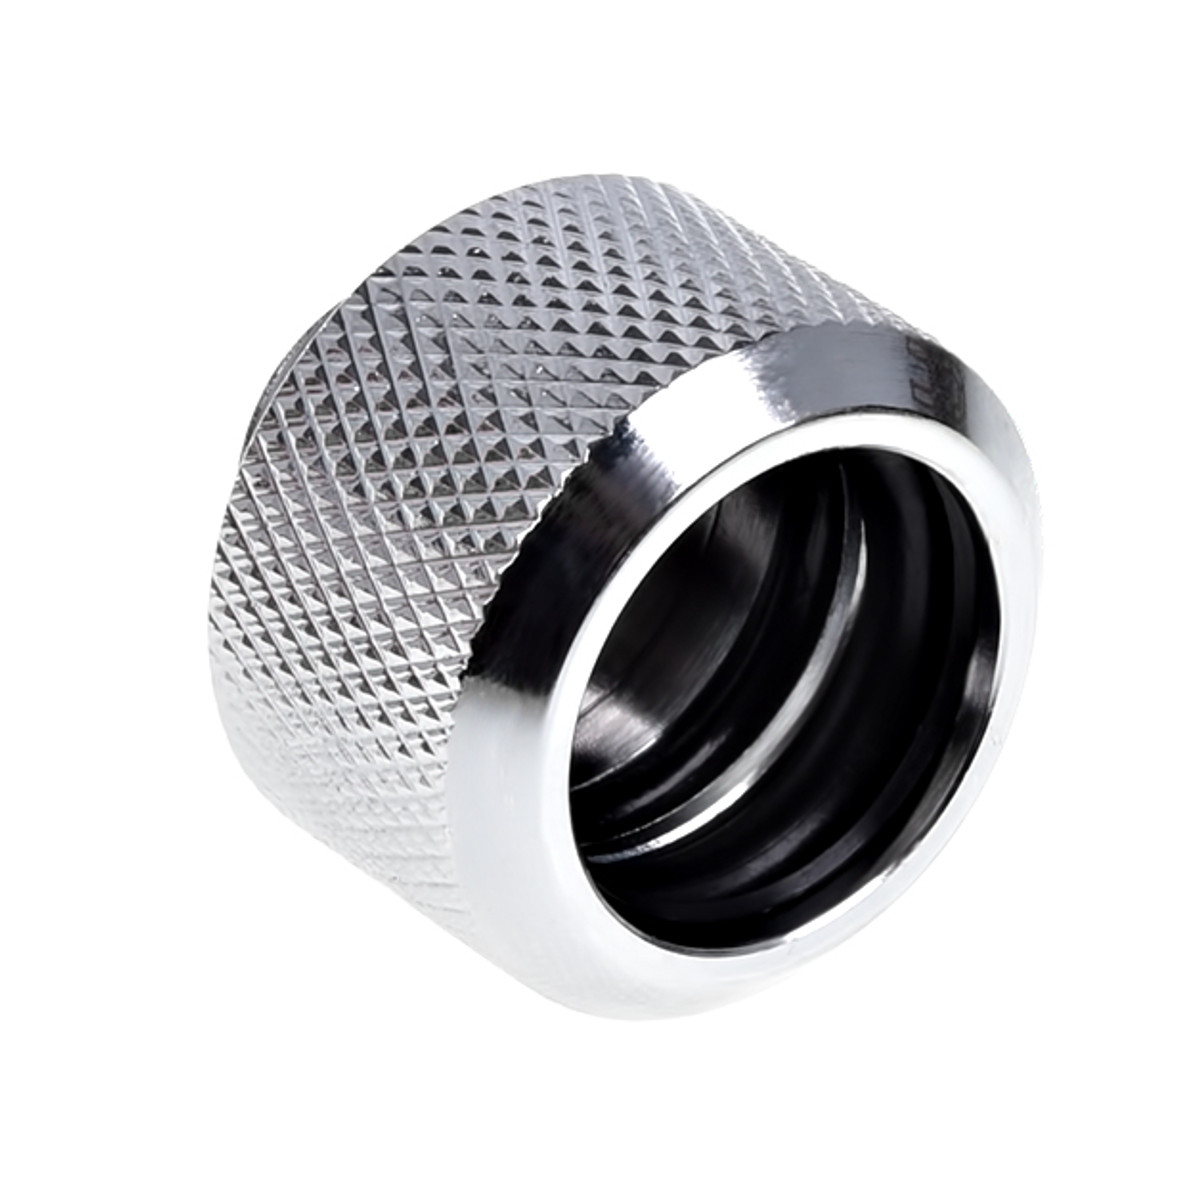 Alphacool - Alphacool Eiszapfen 16mm Chrome Hard Tube Compression Fittings - Six Pack